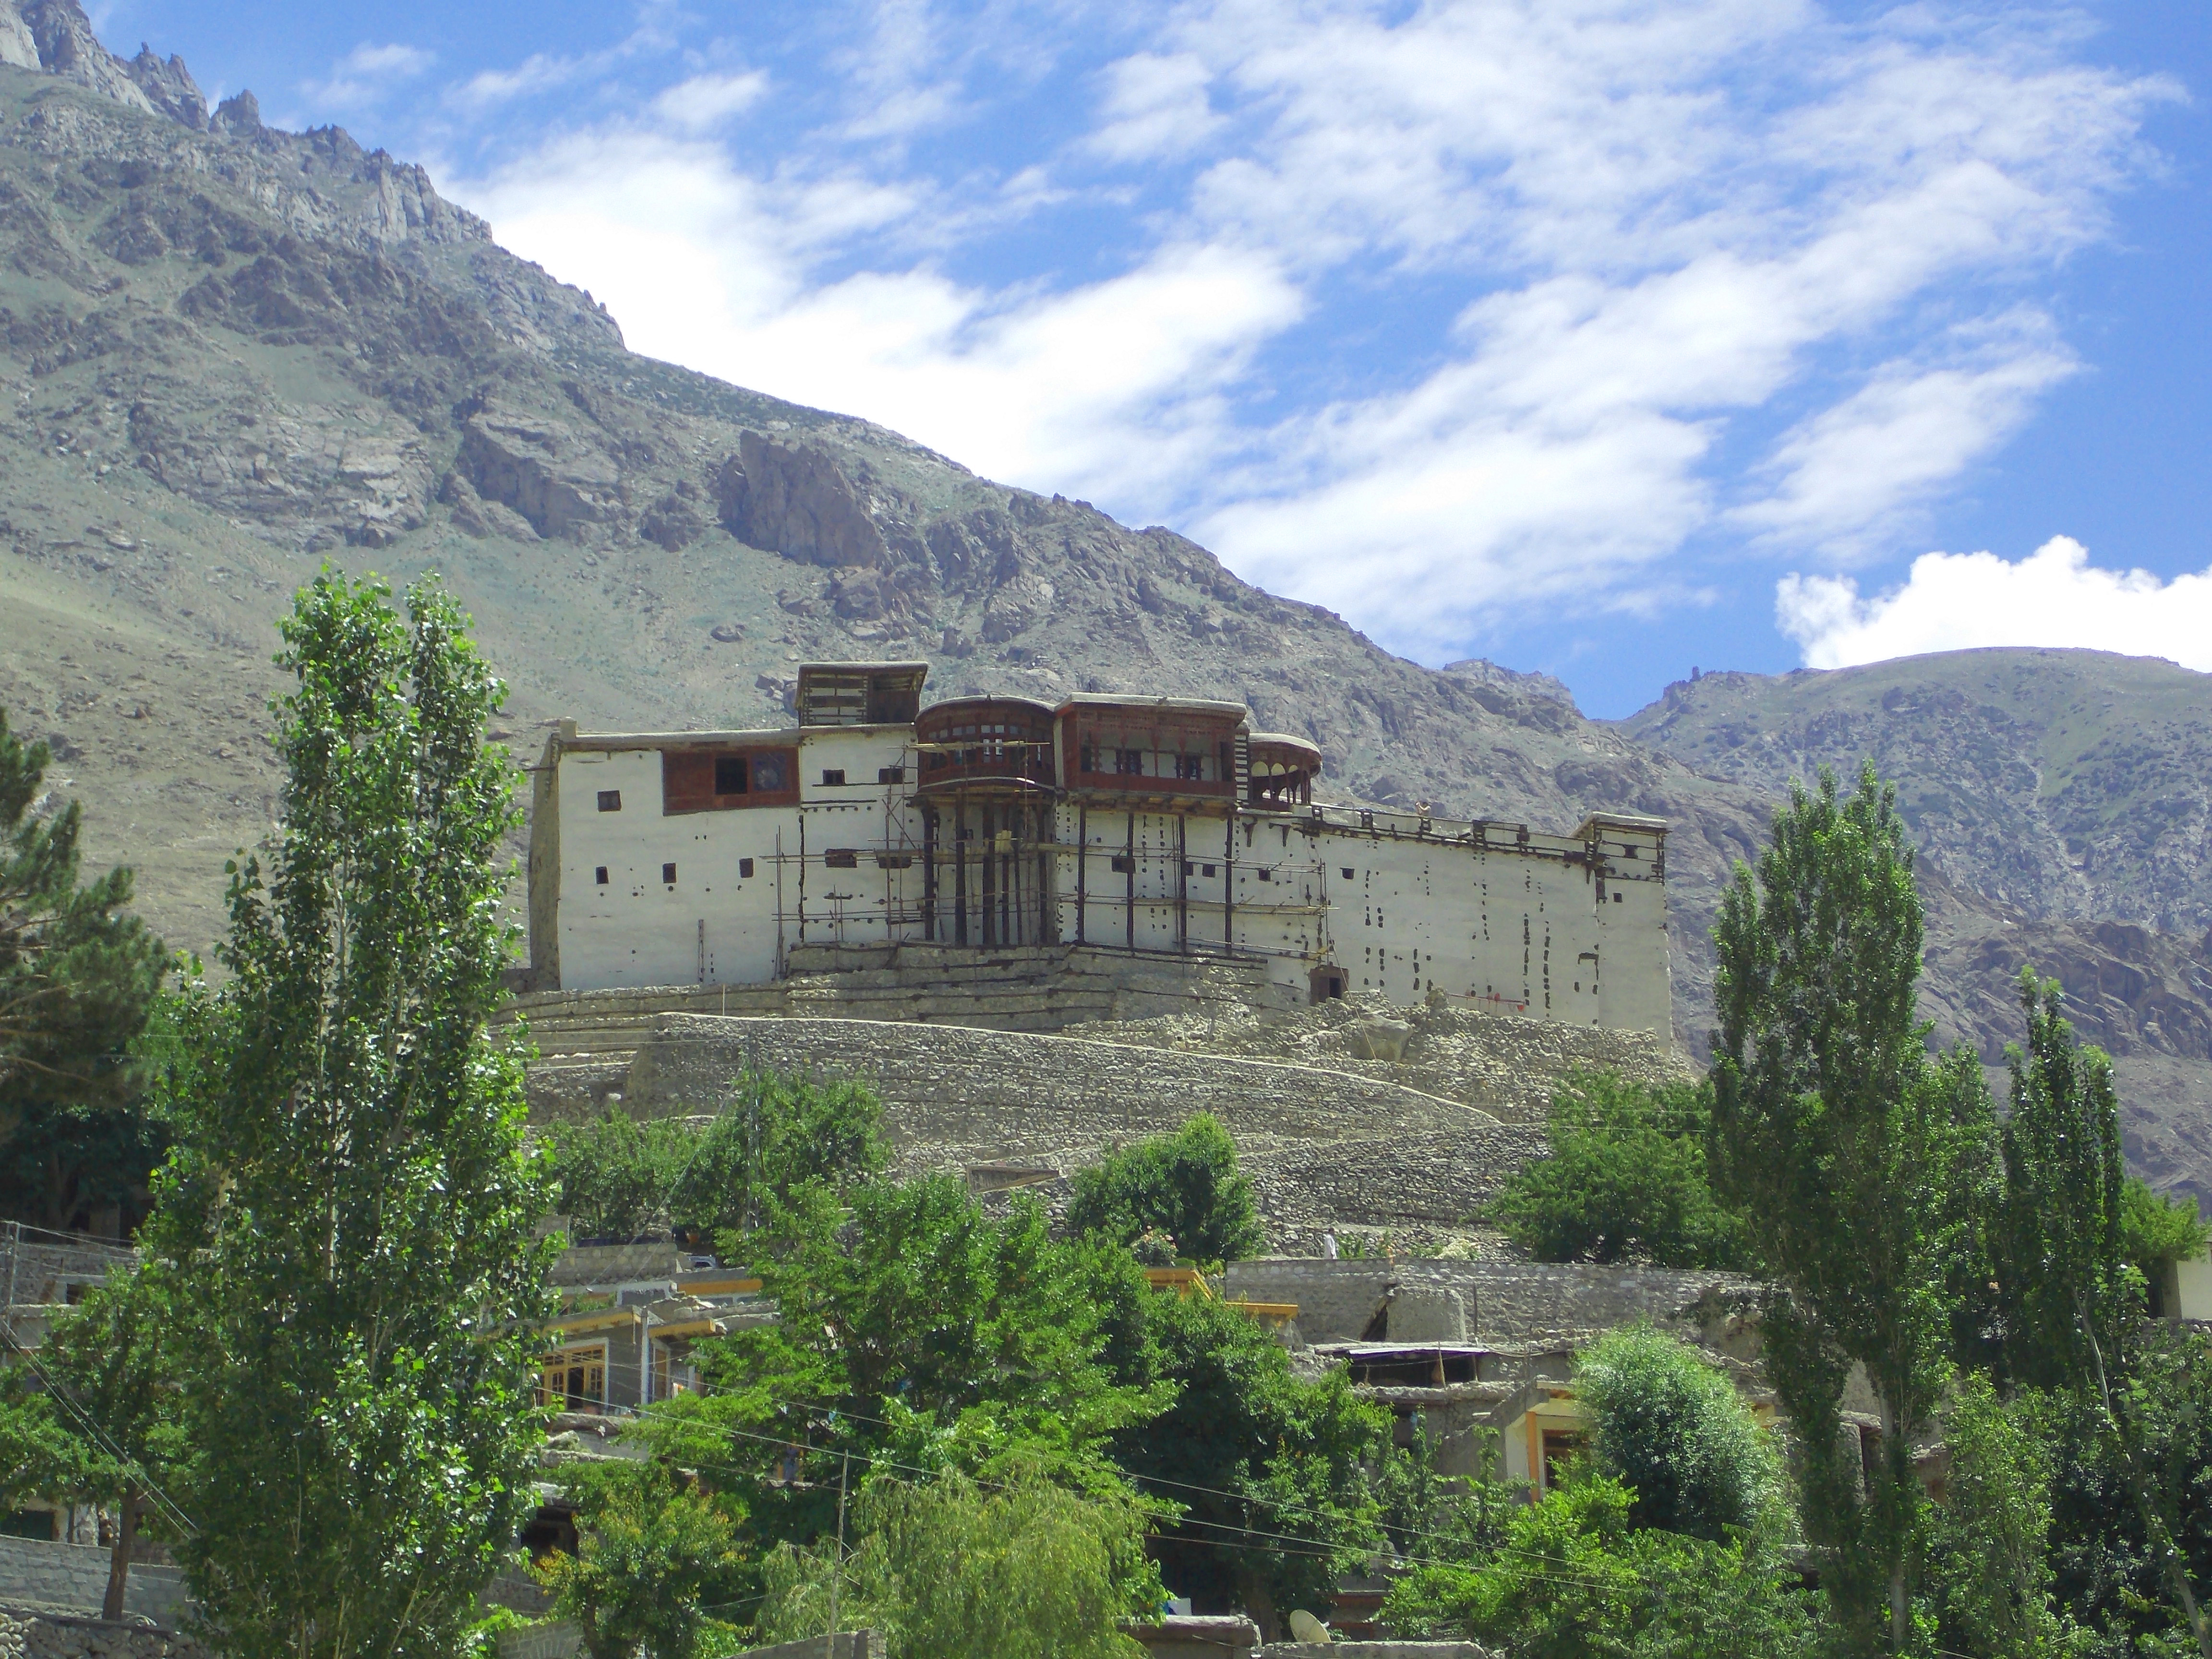 Set in a picturesque backdrop, the Baltit Fort attracts thousands of local, national and international tourists every year 